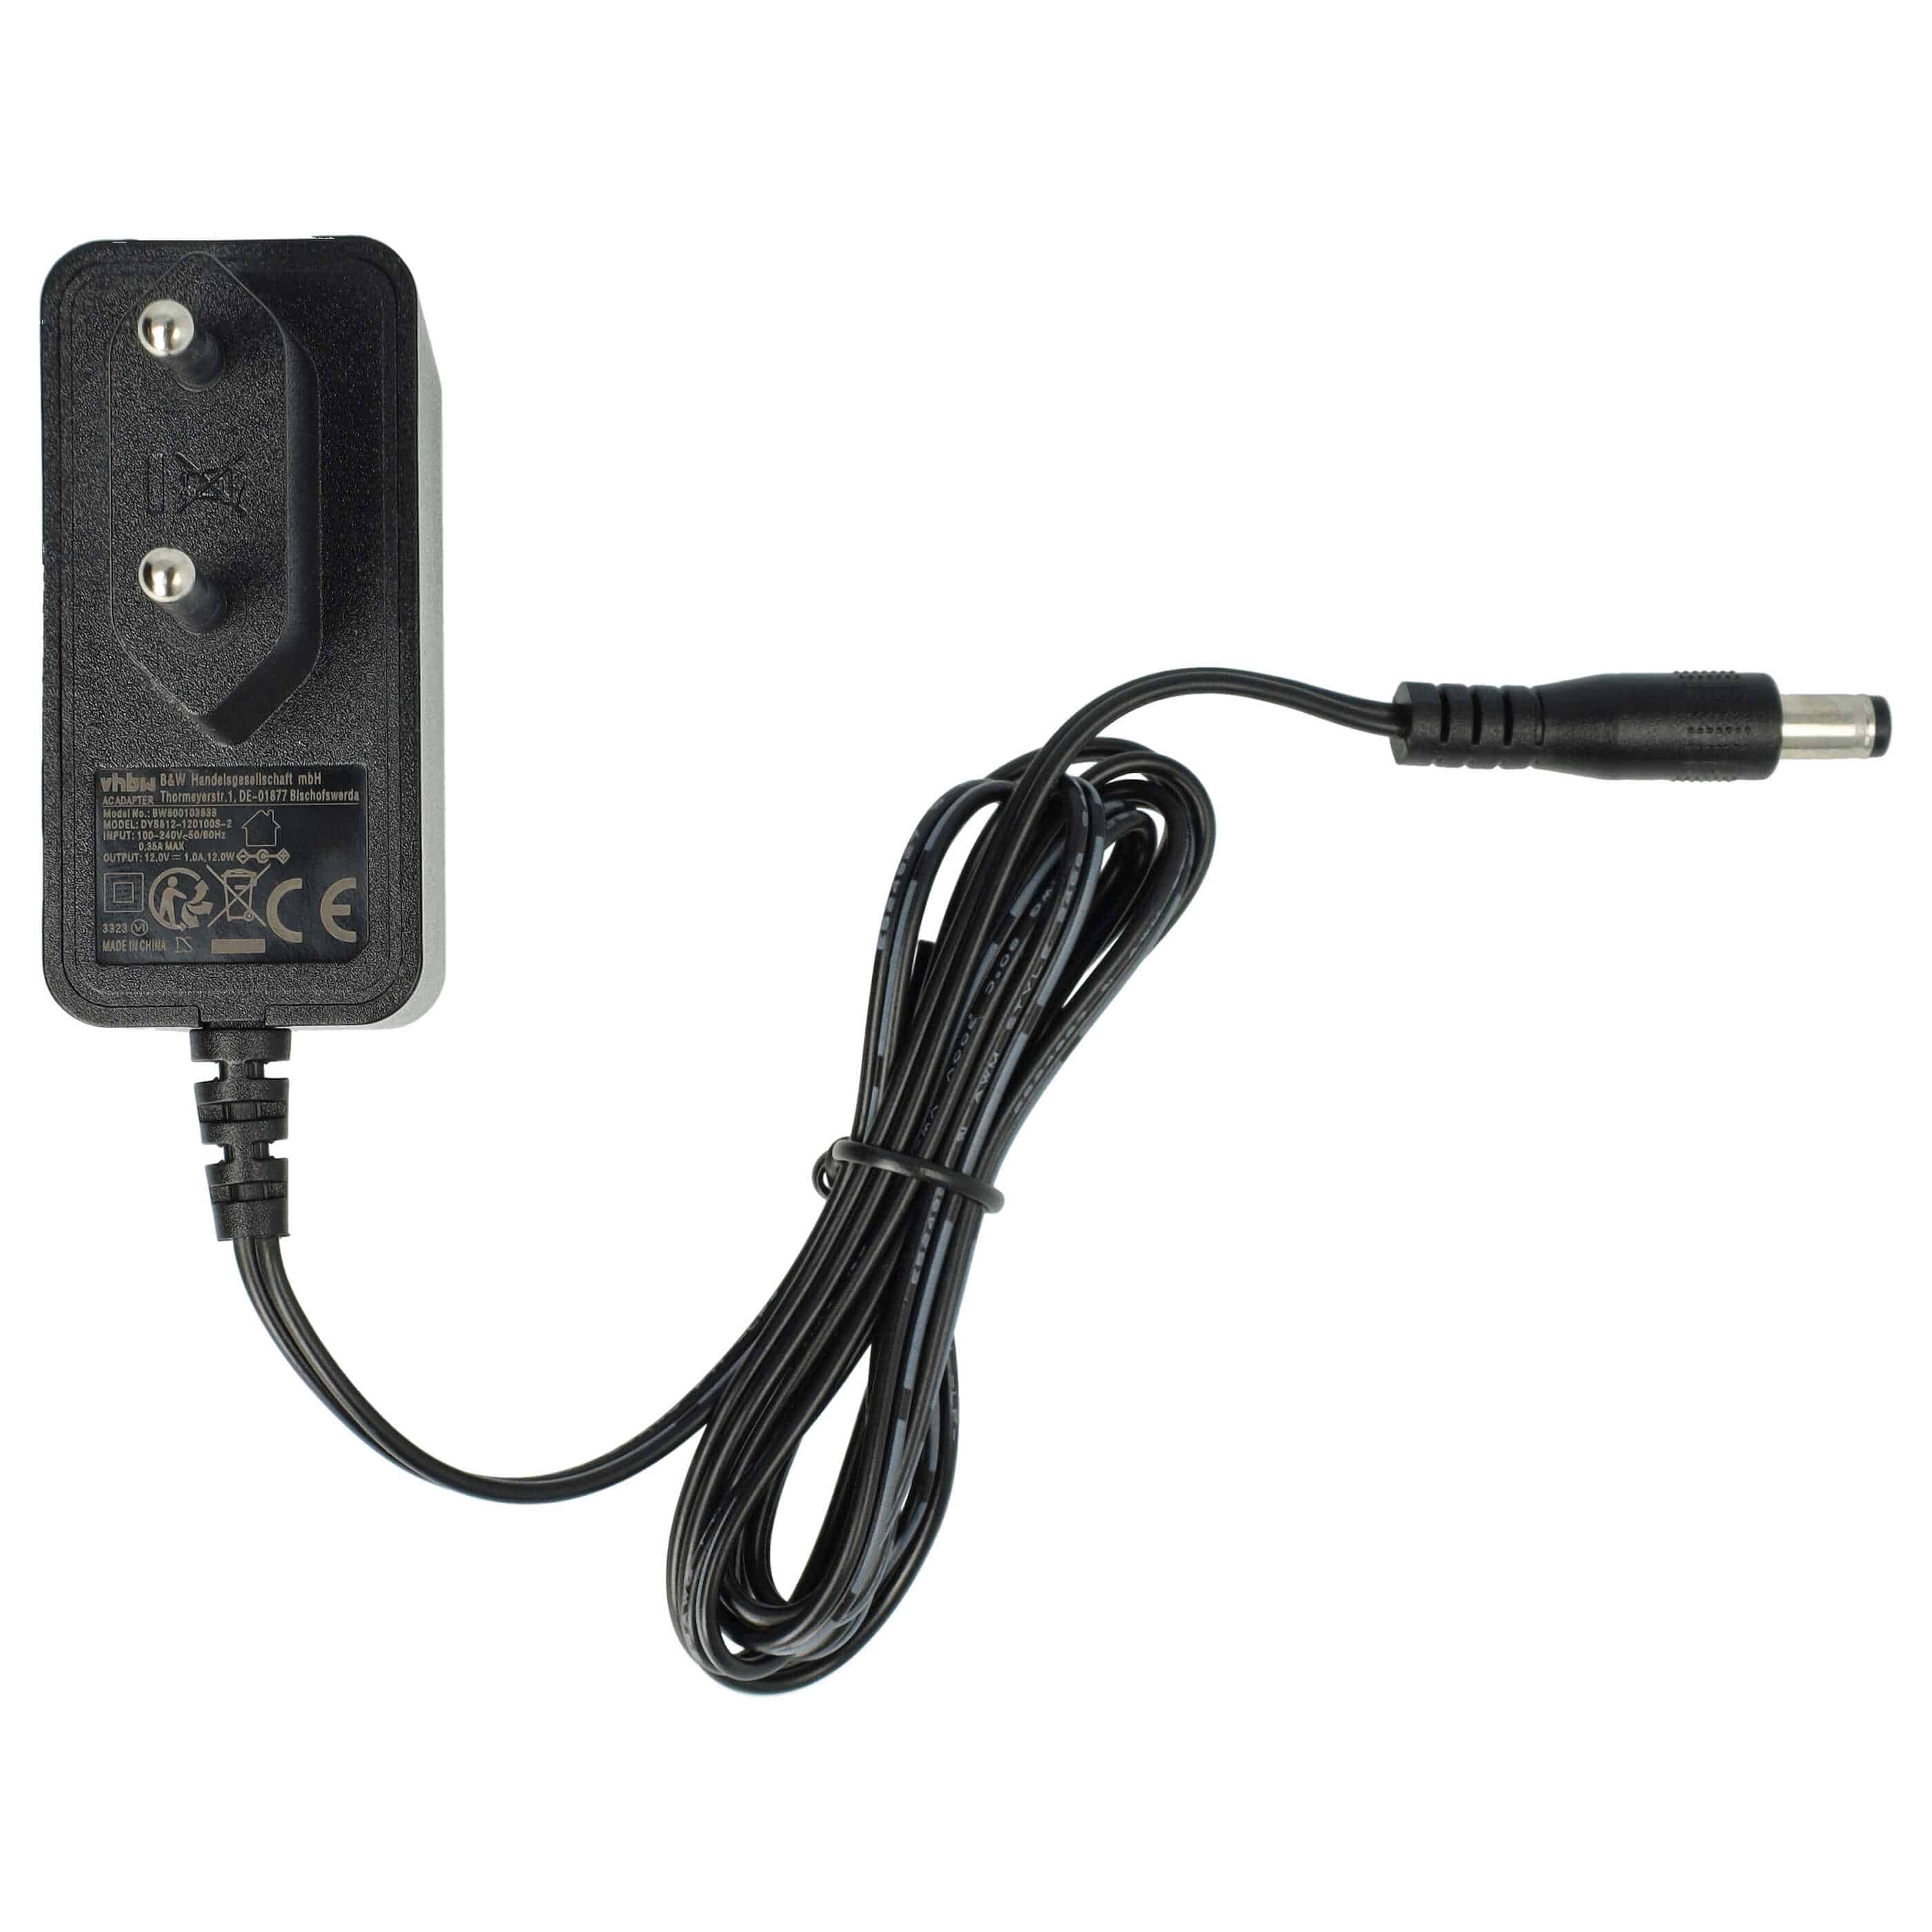 Mains Power Adapter replaces Compex 683000 for Compex Muscle Stimulator, Electro-Stimulator - 120 cm